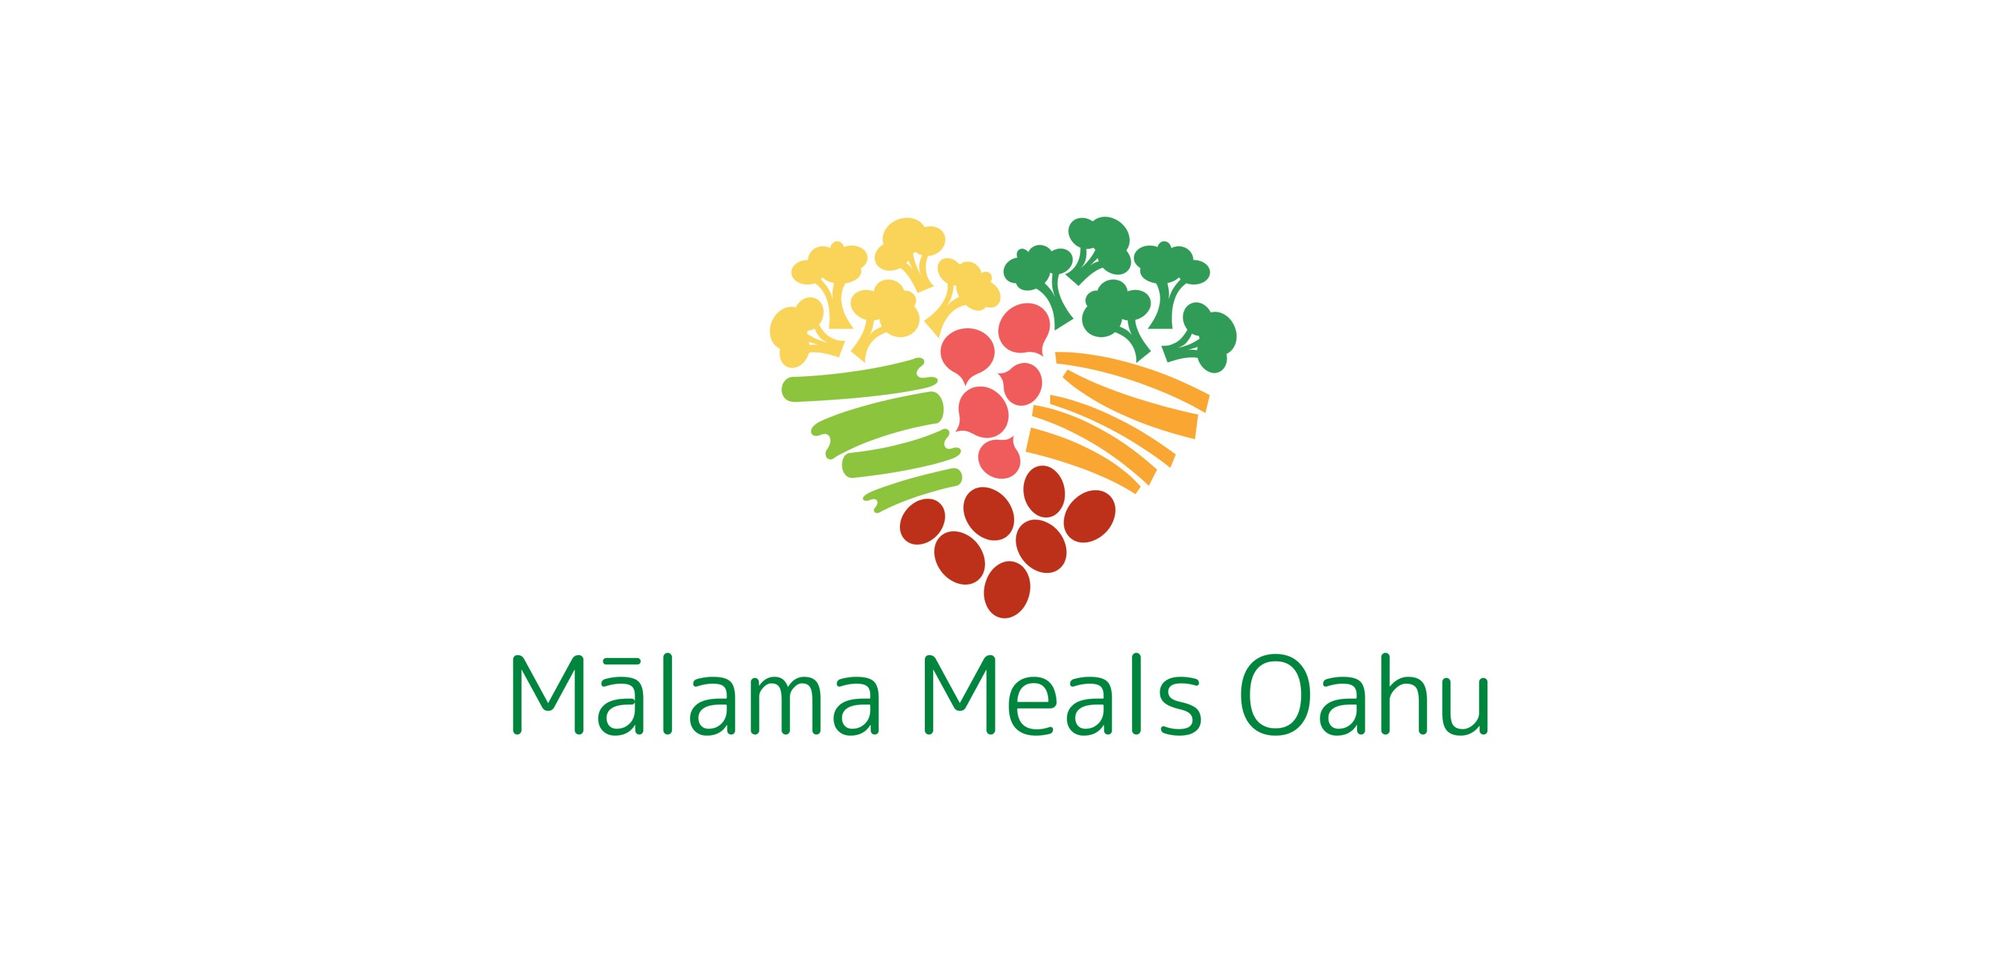 Healthy Meals Delivered to Your Door - Malama Meals Oahu